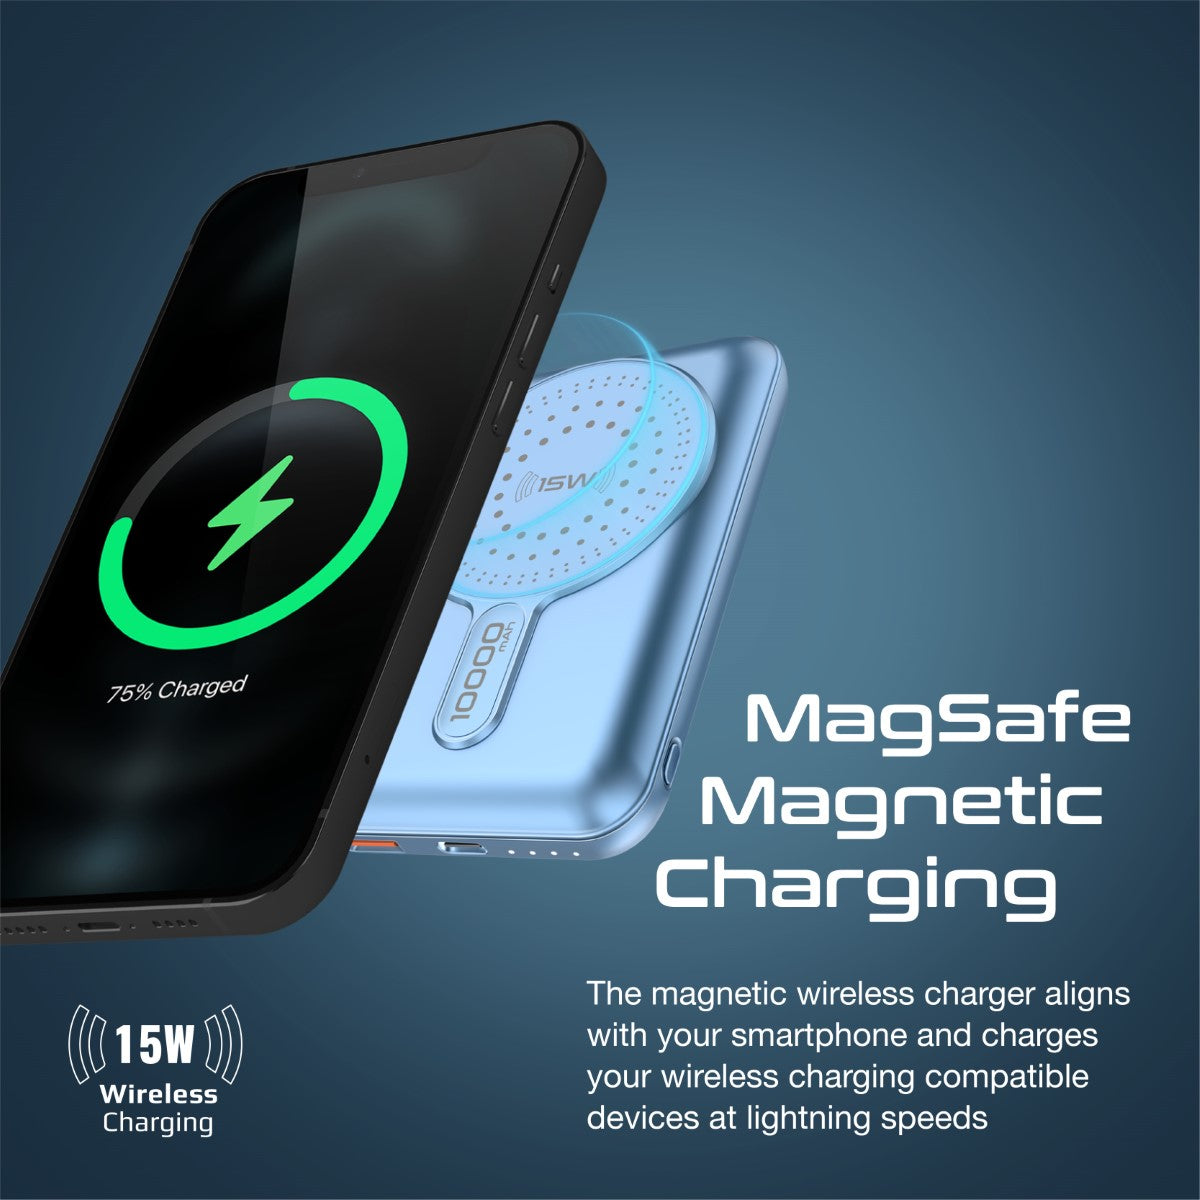 Promate Magnetic Wireless Power Bank, 10000mAh 15W Qi Wireless Mag-Safe Battery Pack with 20W USB-C Power Delivery Port, 18W QC 3.0 Port and Foldable Stand for iPhone 13, iPad Air PowerMag-10Pro Blue